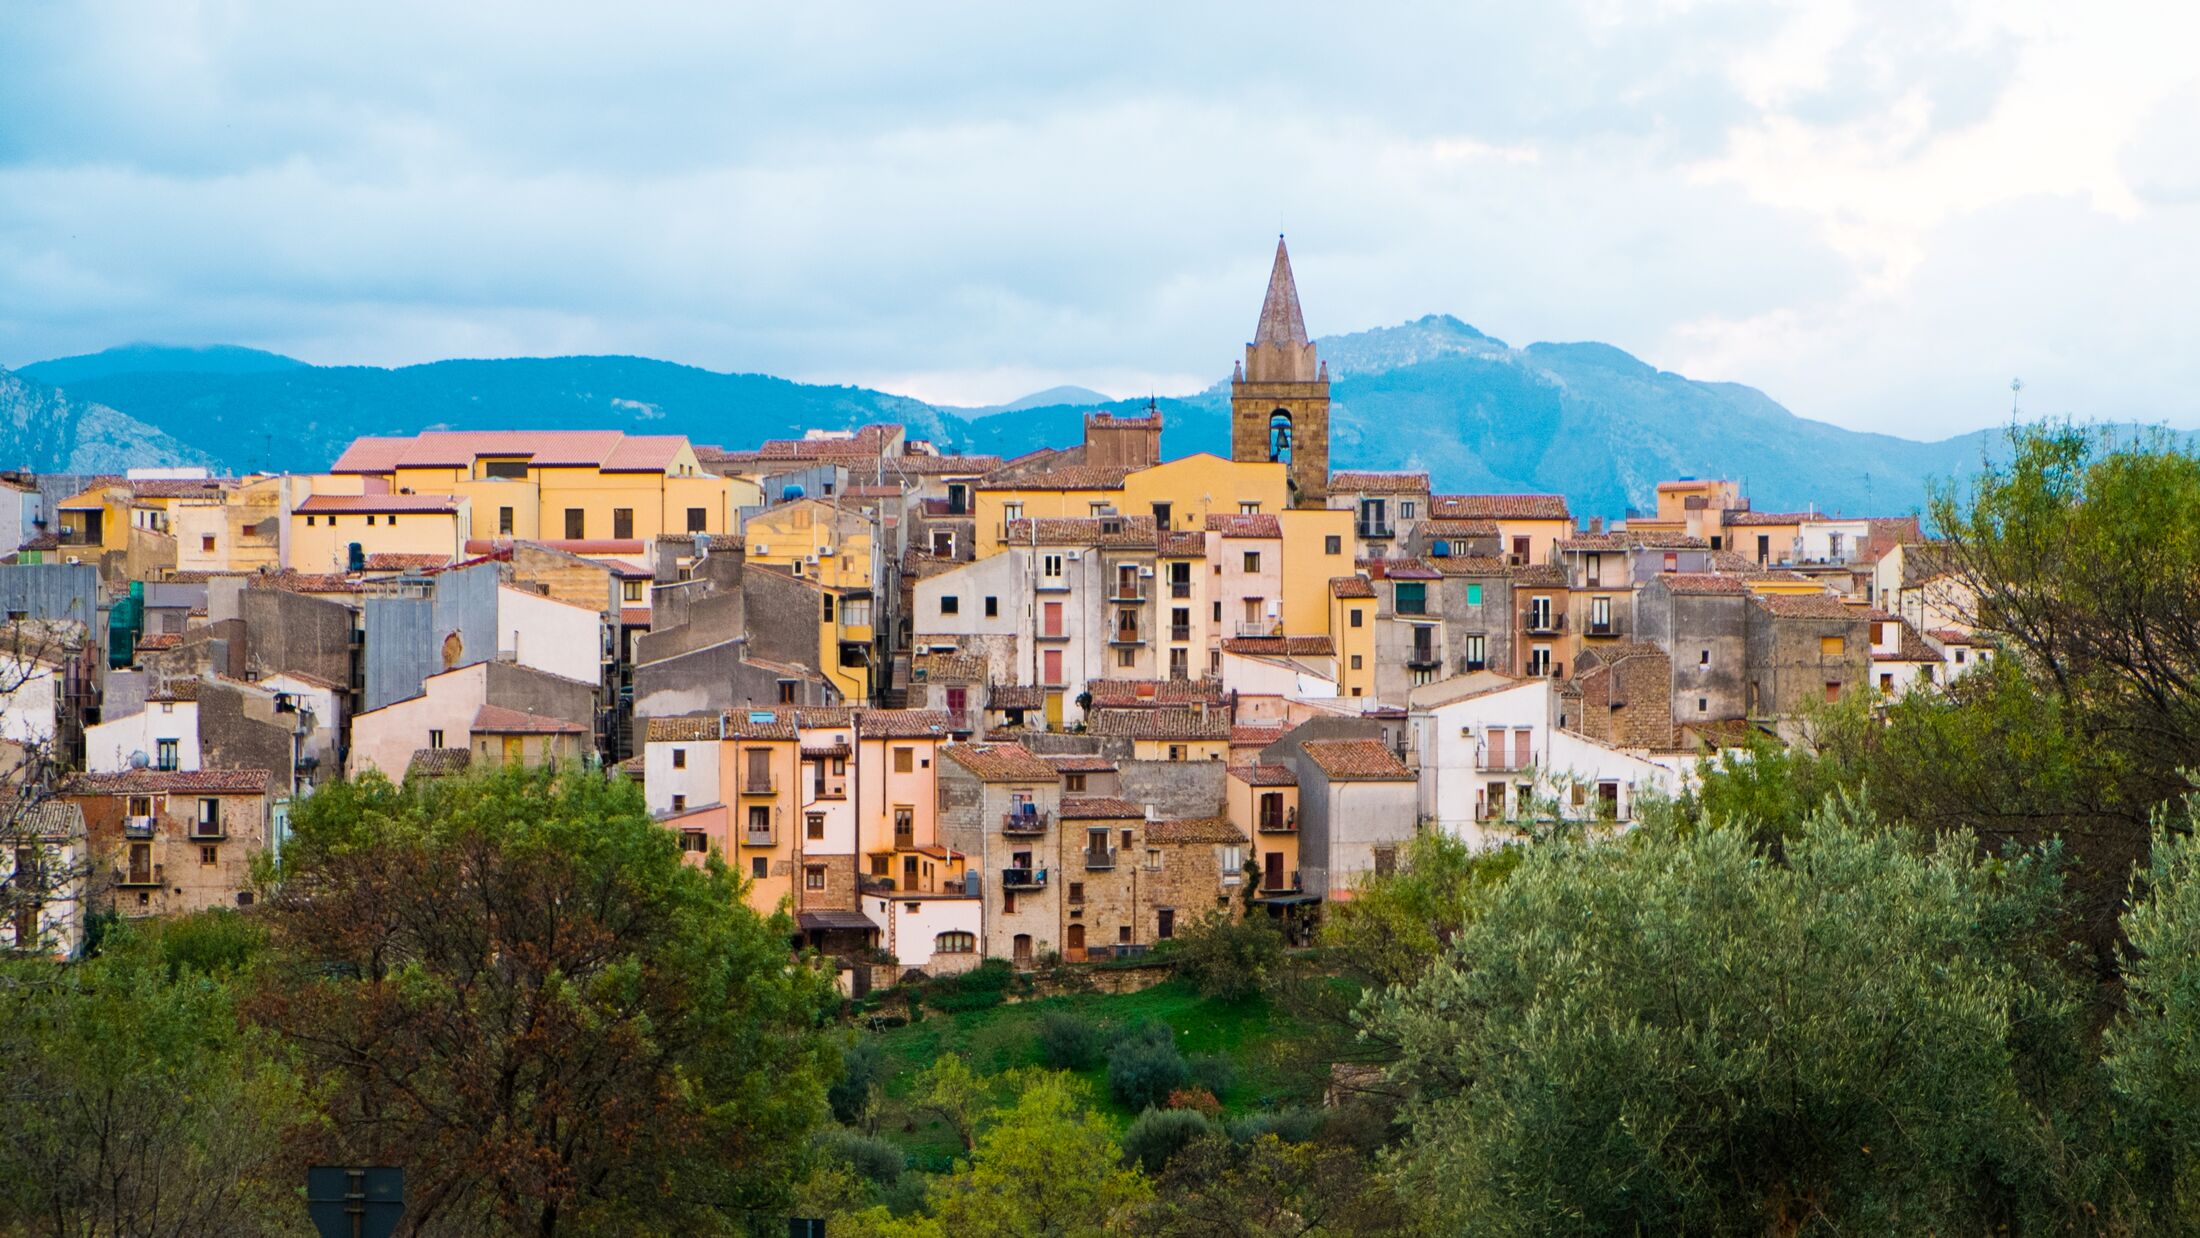 Town of Castelbuono on the Madonie mountains, Sicily, Italy